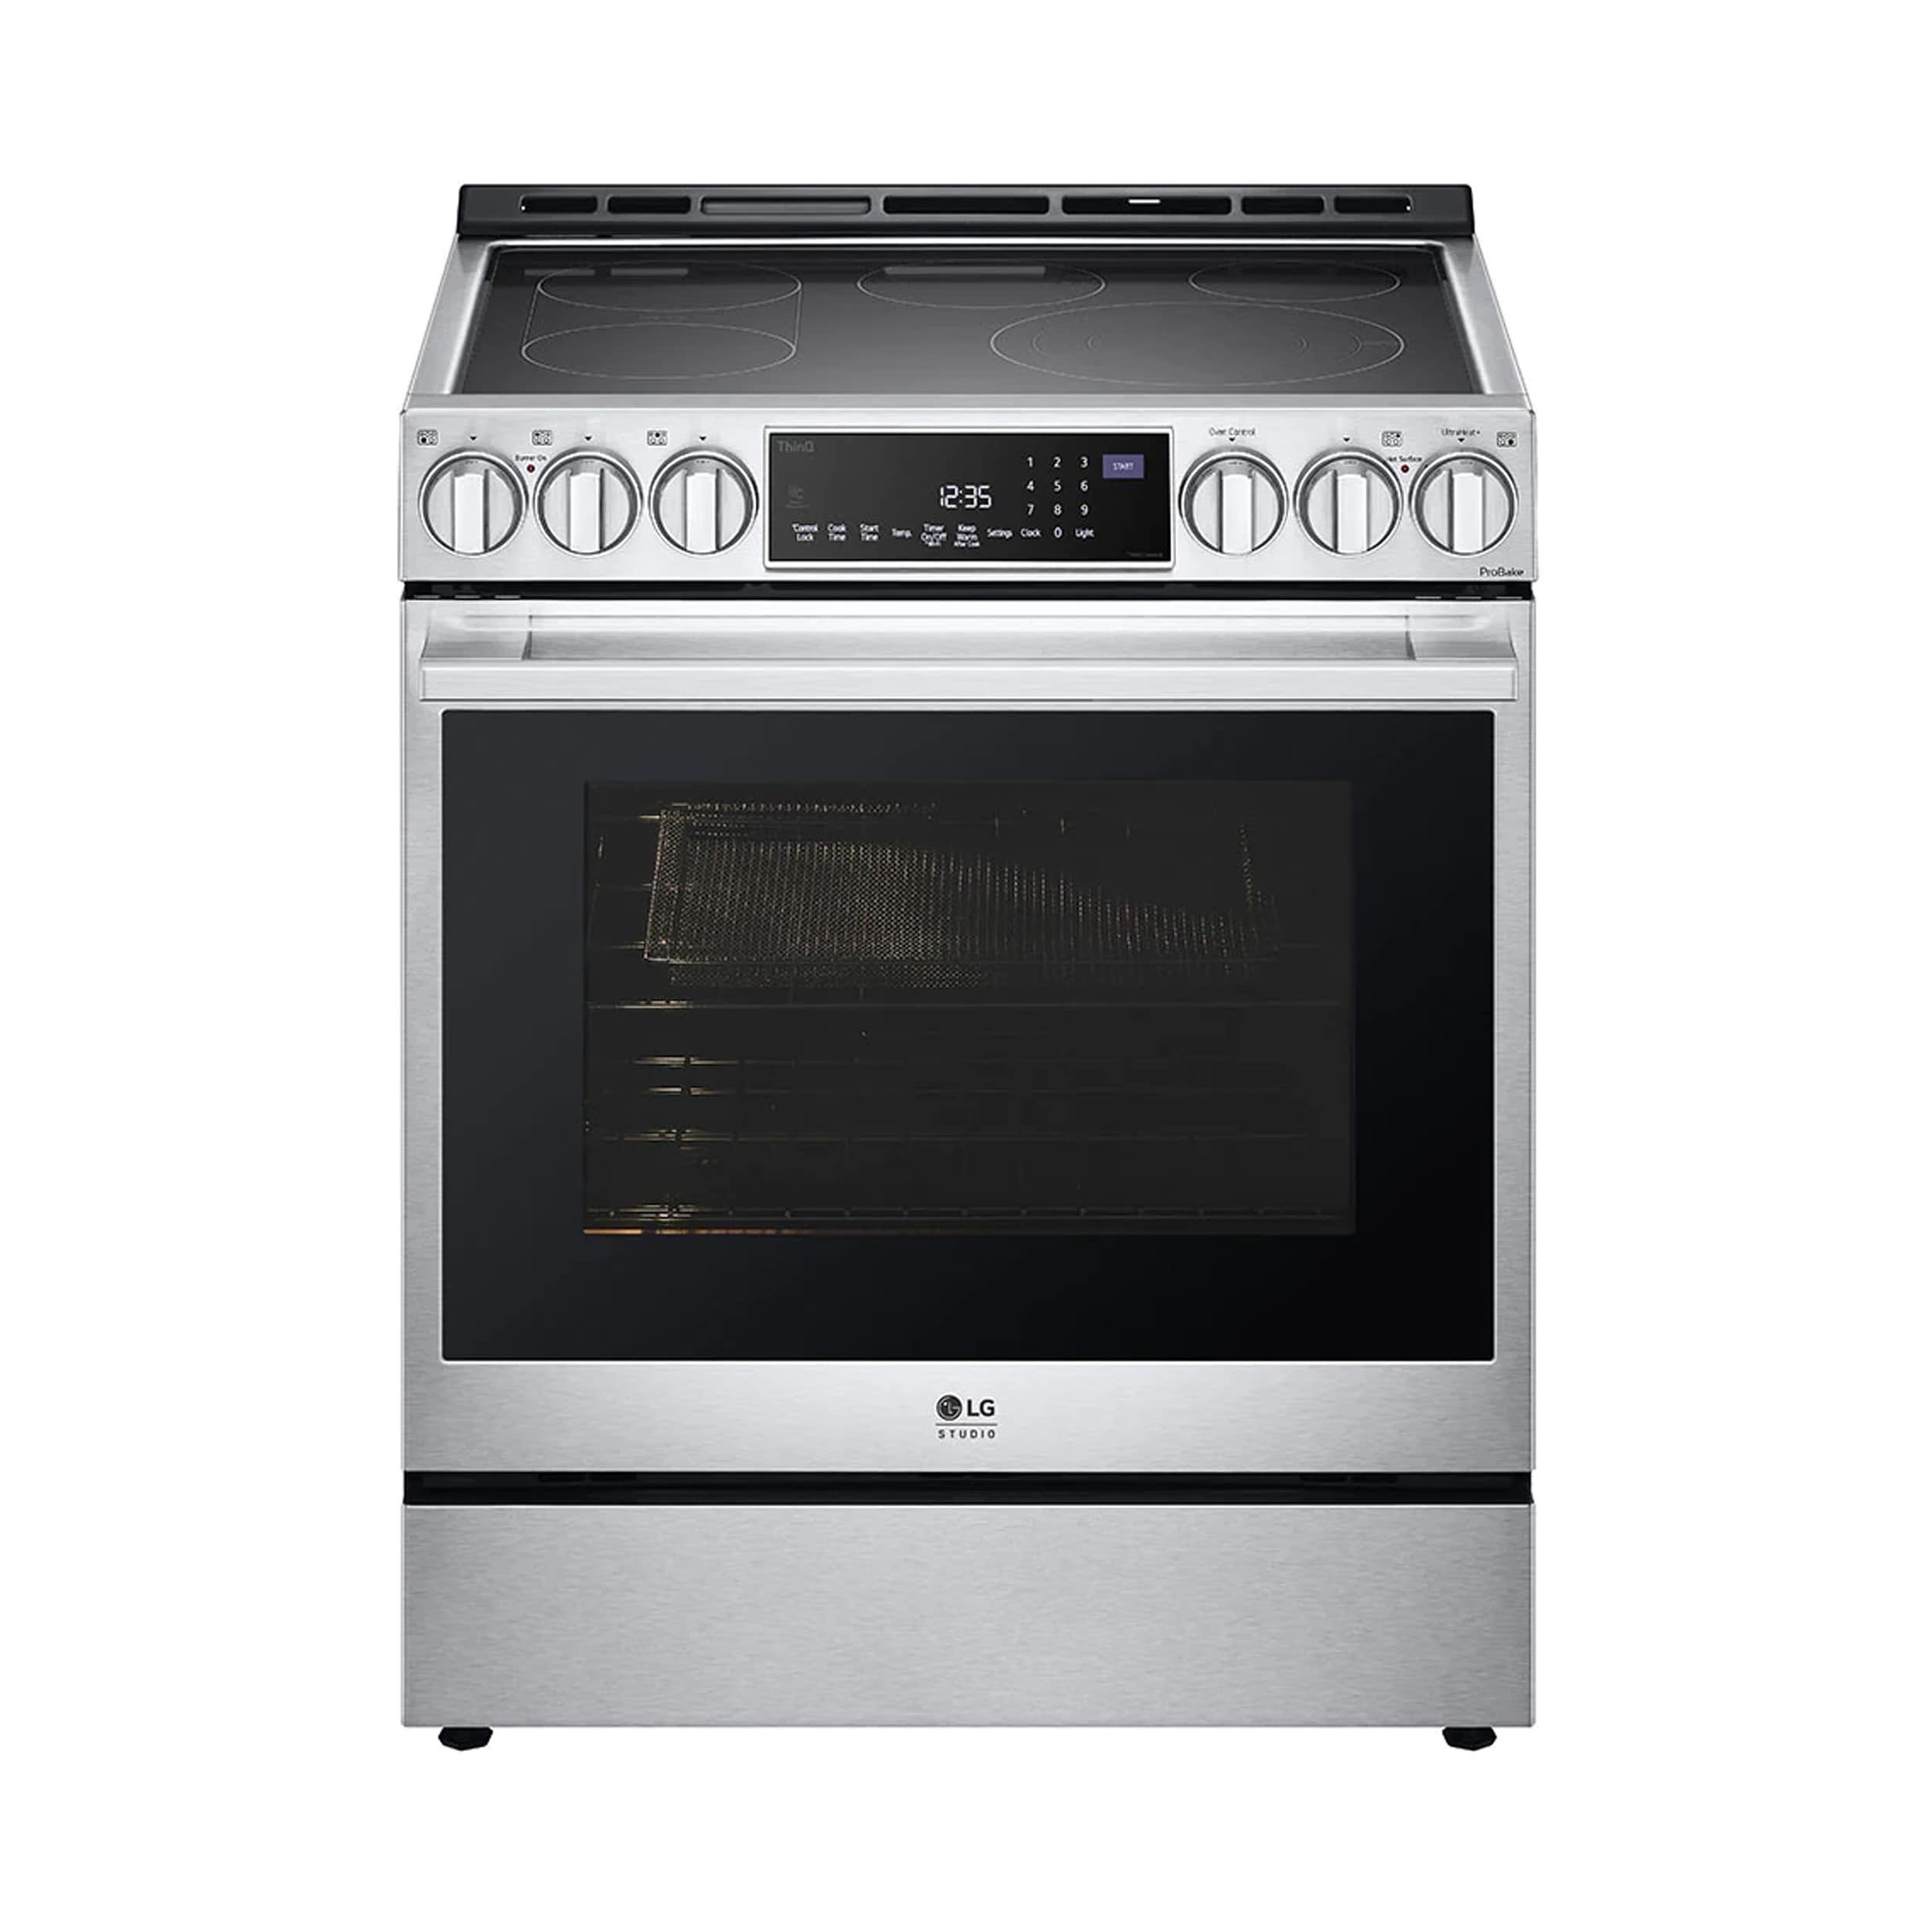 LG Studio 6.3 cu. ft. InstaView Electric Slide-in Range with ProBake Convection and Air Fry